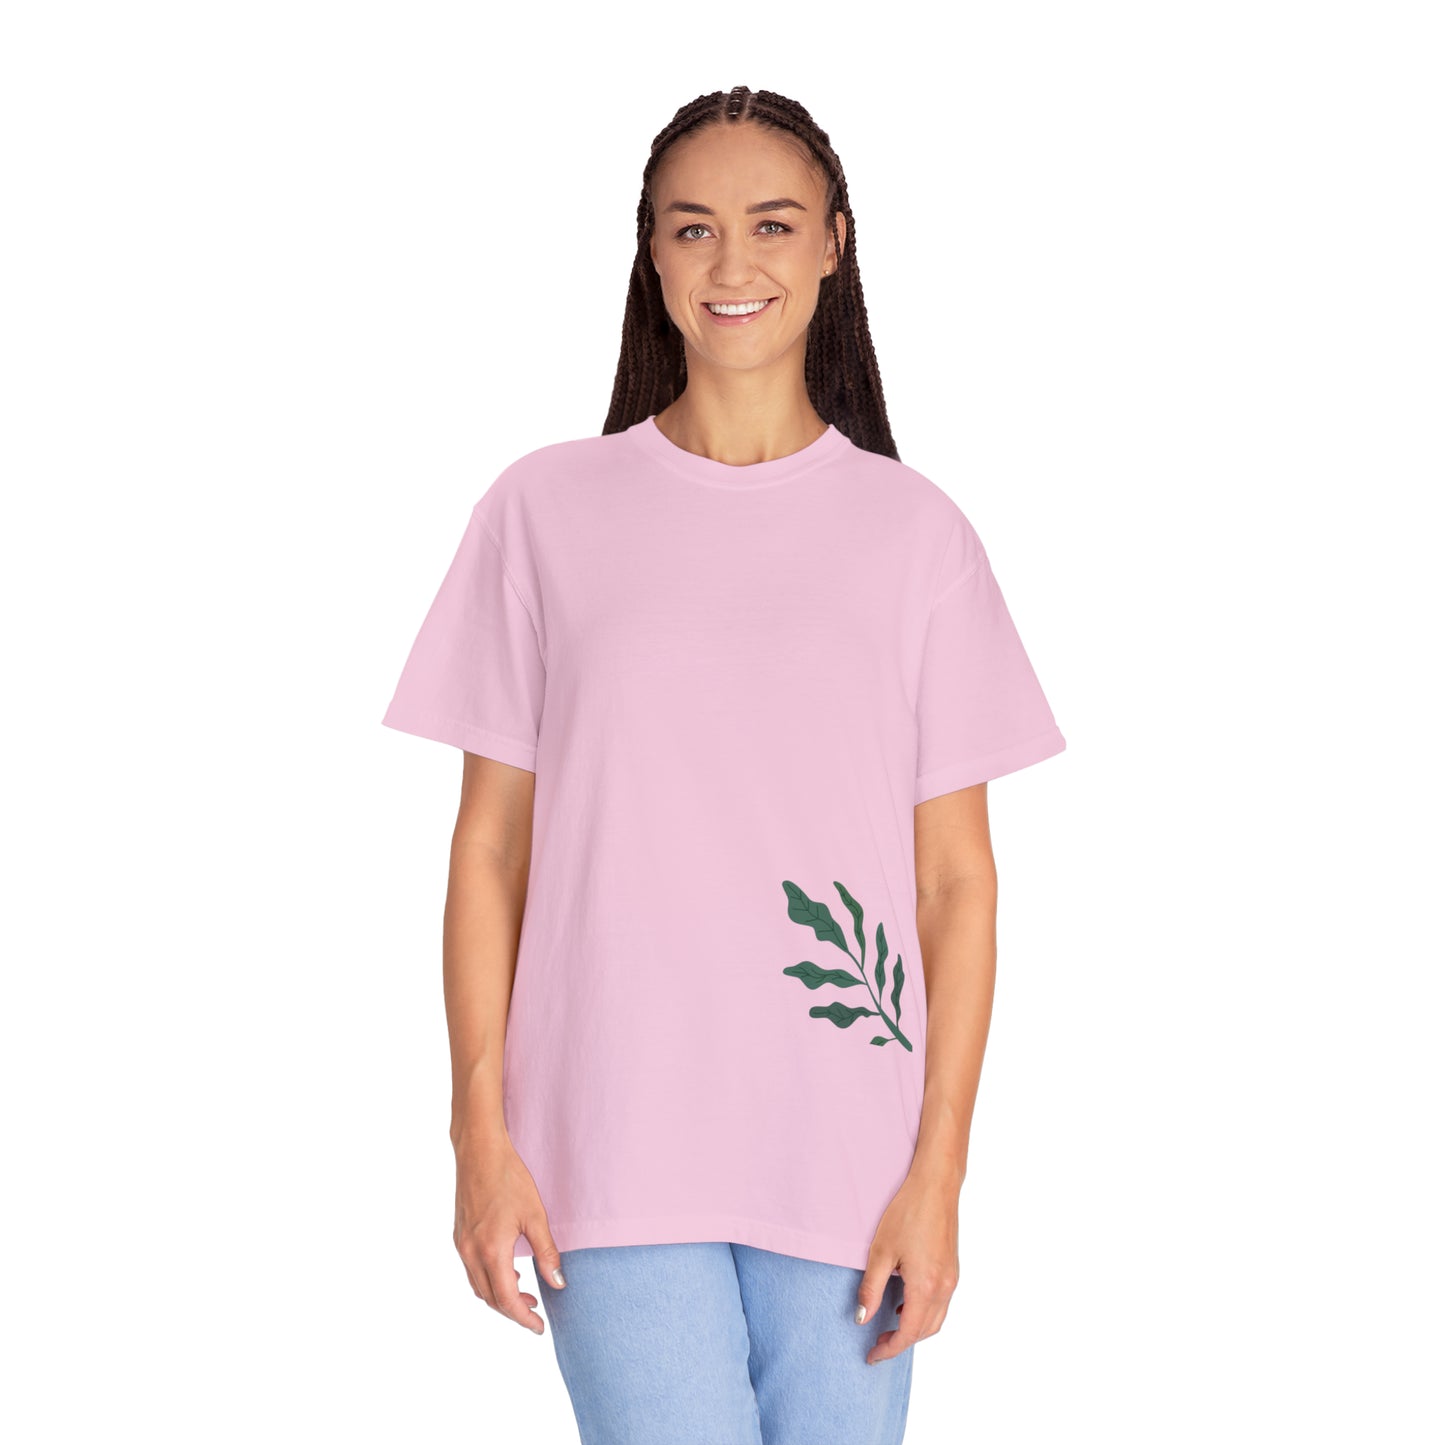 Copy of Copy of Unisex Garment-Dyed T-shirt